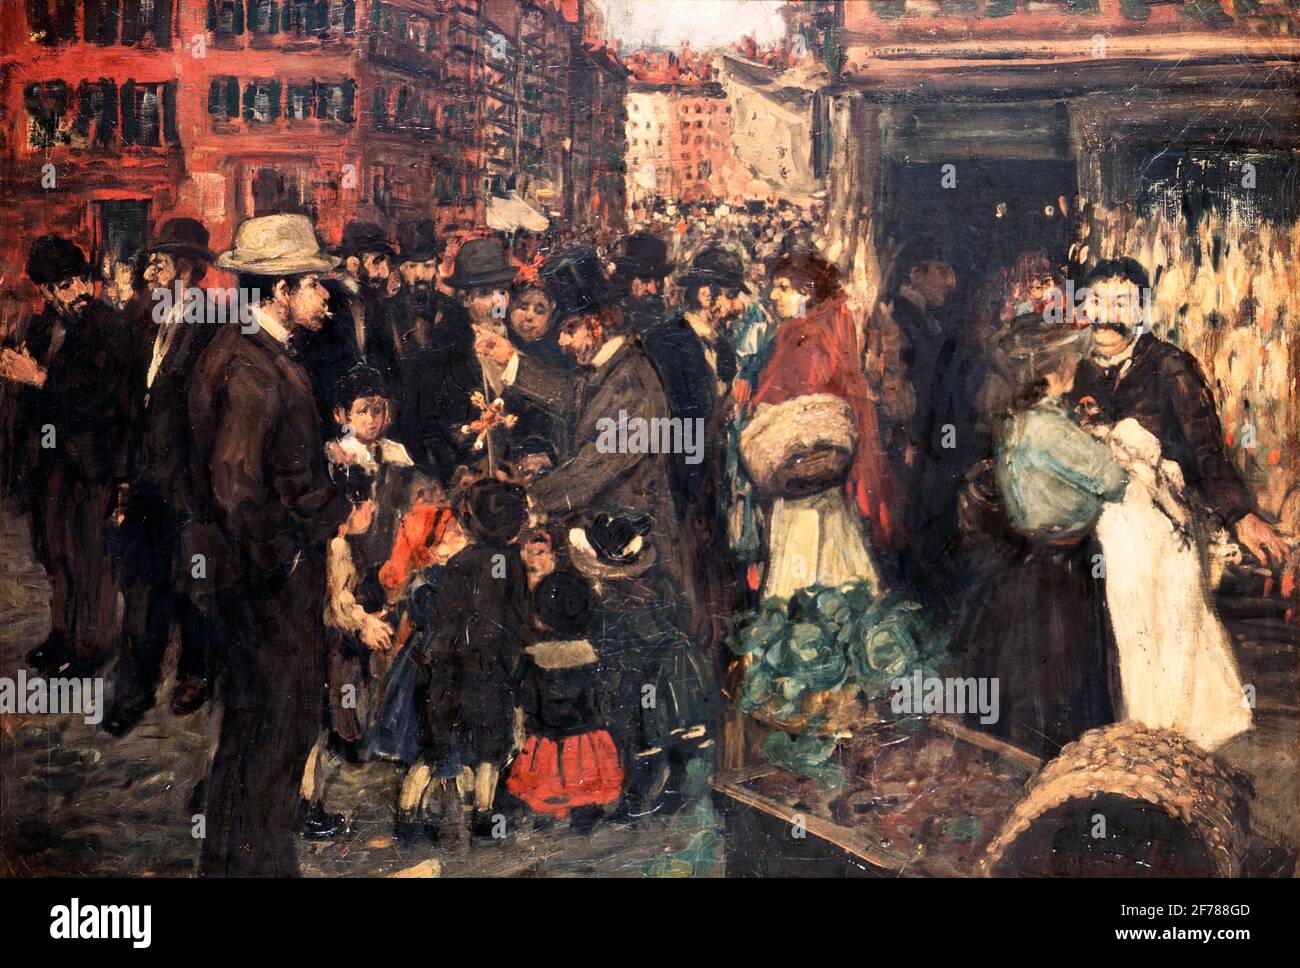 1900s 1905 PAINTING HESTER STREET LOWER EAST SIDE IMMIGRANT NEIGHBORHOOD BY GEORGE LUKS NEW YORK CITY ny usa - ka9262 SPL001 HARS FRIENDSHIP FULL-LENGTH LOWER UNITED STATES OF AMERICA NORTH AMERICA FREEDOM NORTH AMERICAN IMMIGRANTS DREAMS NEIGHBORHOOD DISCOVERY STRENGTH COURAGE EXCITEMENT IMMIGRANT POWERFUL RECREATION GOTHAM DIRECTION BY OPPORTUNITY NYC OCCUPATIONS 1905 CONCEPTUAL NEW YORK CITIES STYLISH NEW YORK CITY BOROUGH COOPERATION EXPERIENCE TOGETHERNESS BIG APPLE LOWER EAST SIDE OLD FASHIONED Stock Photo